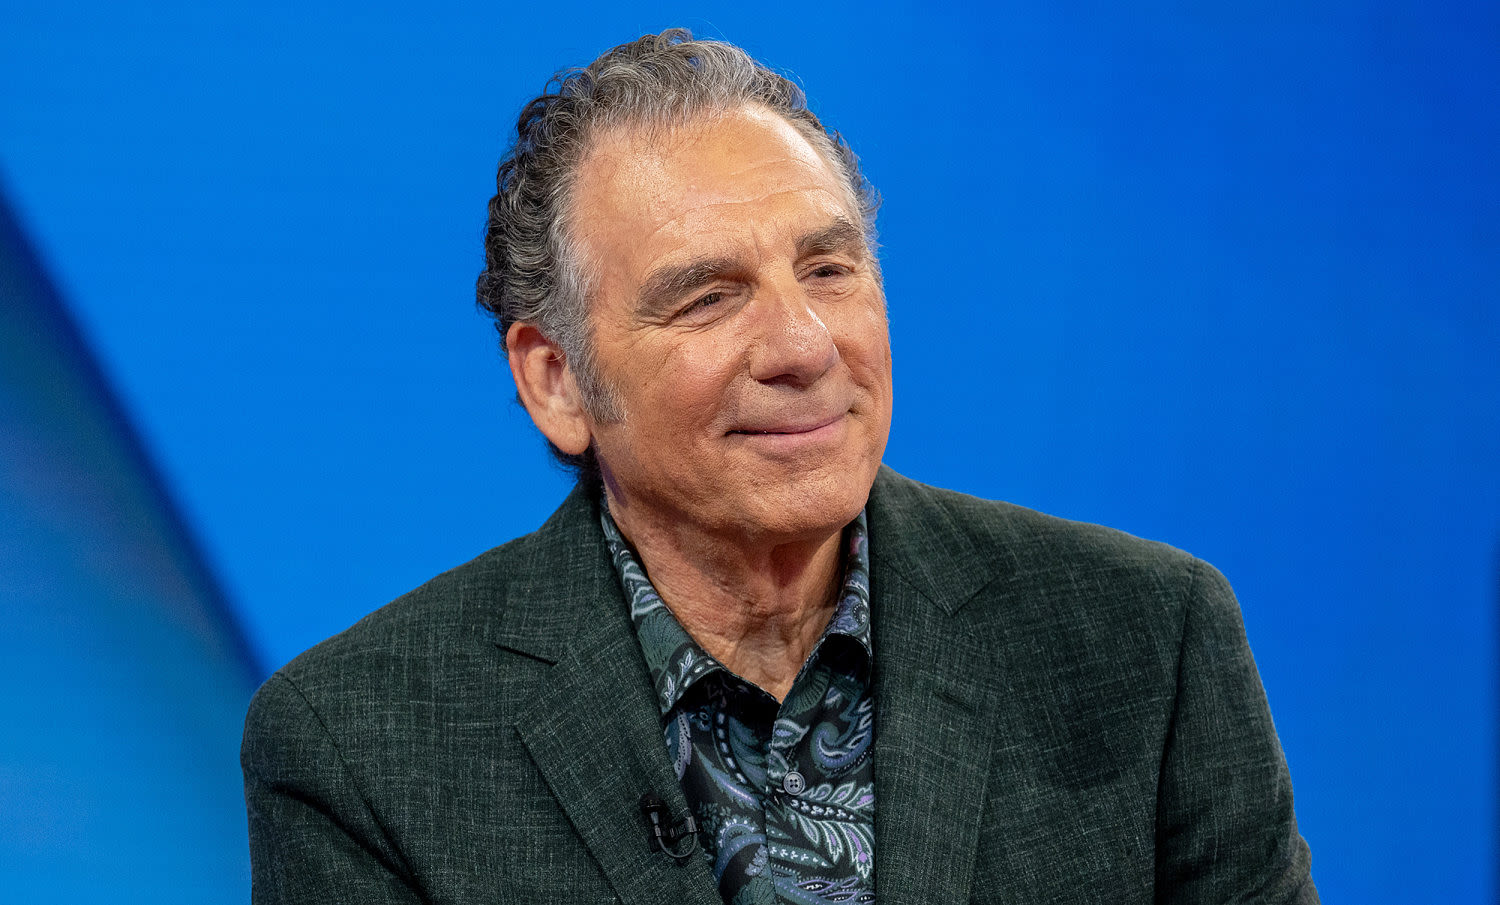 Michael Richards reveals his son’s favorite ‘Seinfeld’ character ... and it’s not Kramer